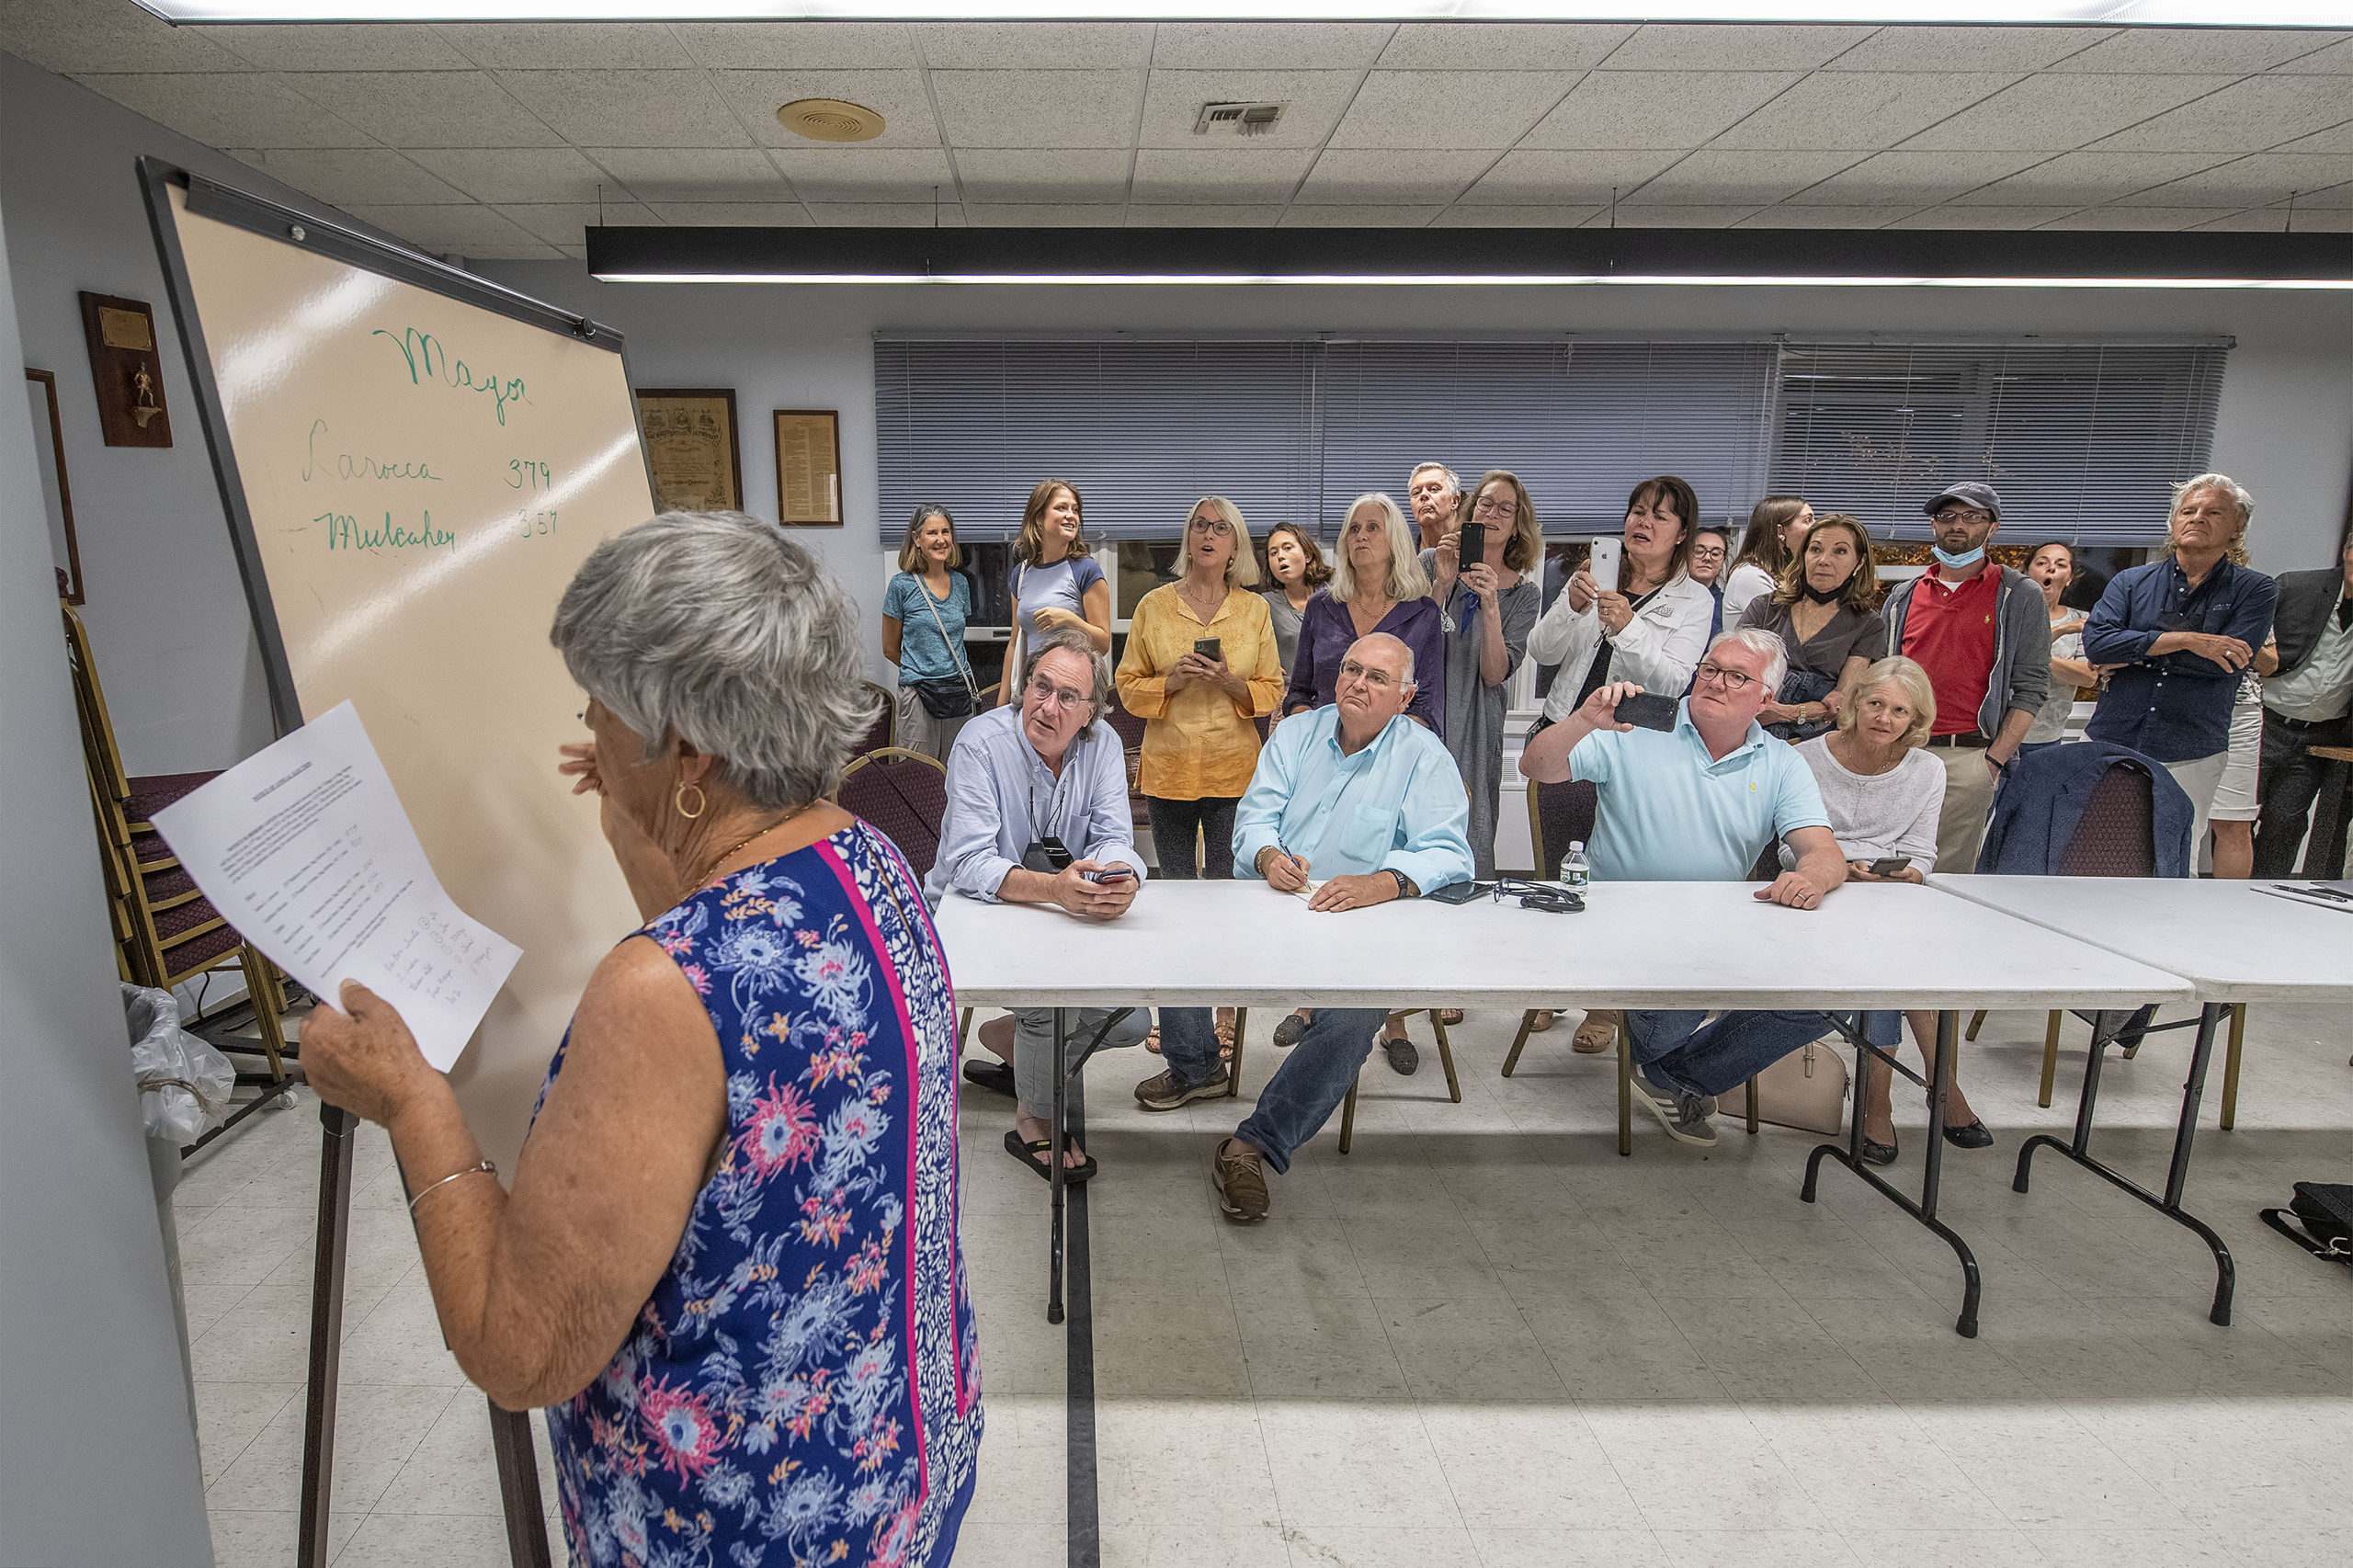 Diane Schiavoni had the rapt attention of onlookers as she wrote down the results of Sag Harbor's hotly contested mayoral race Tuesday night. MICHAEL HELLER